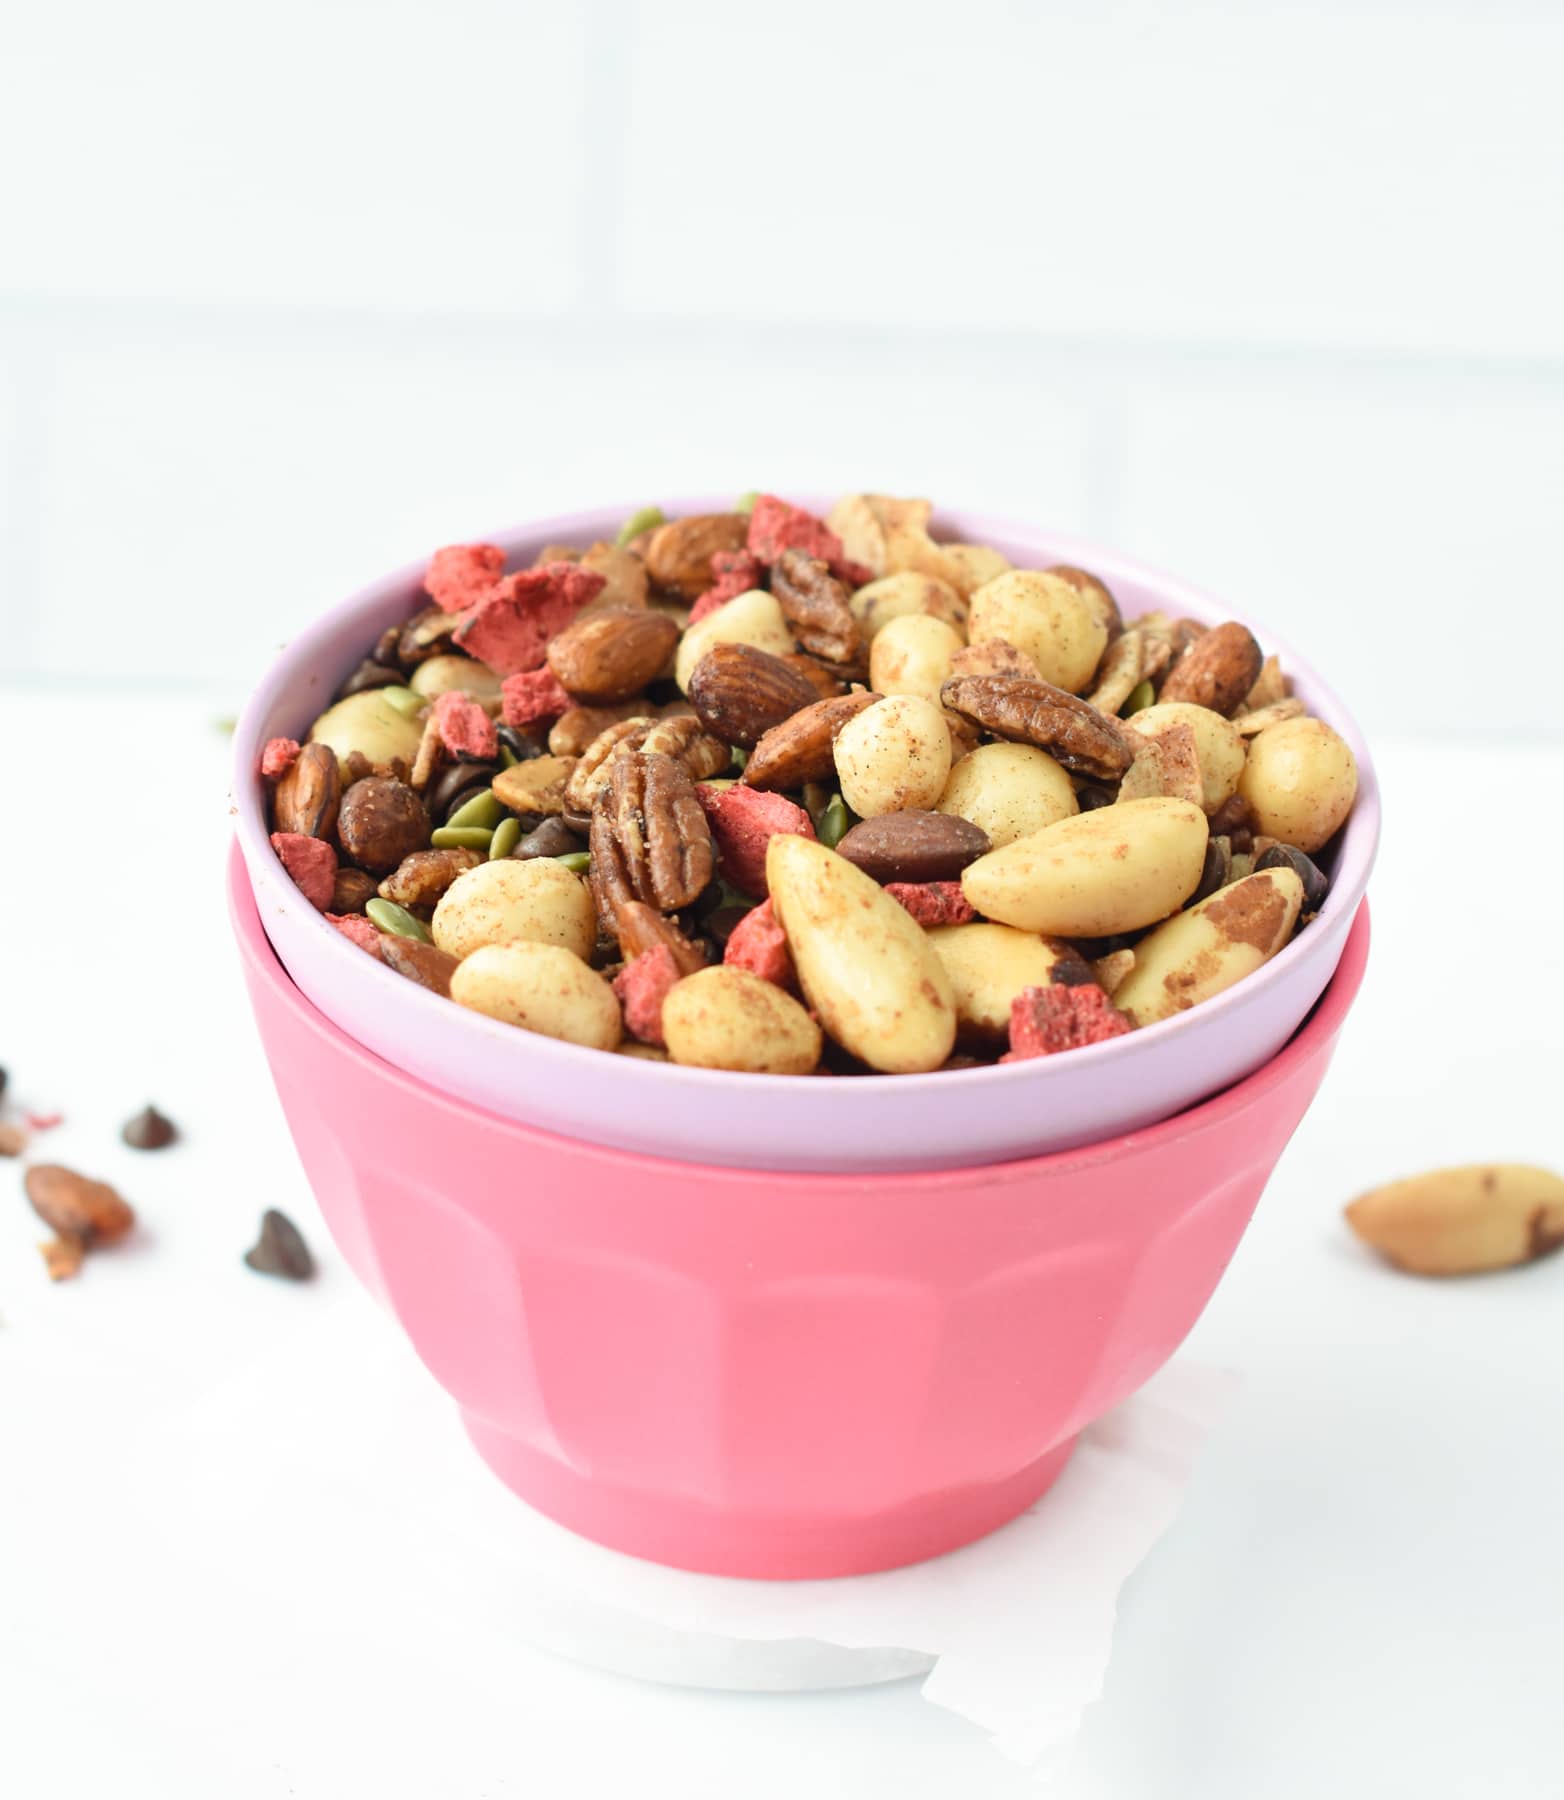 Healthy trail mix in a pink bowl.